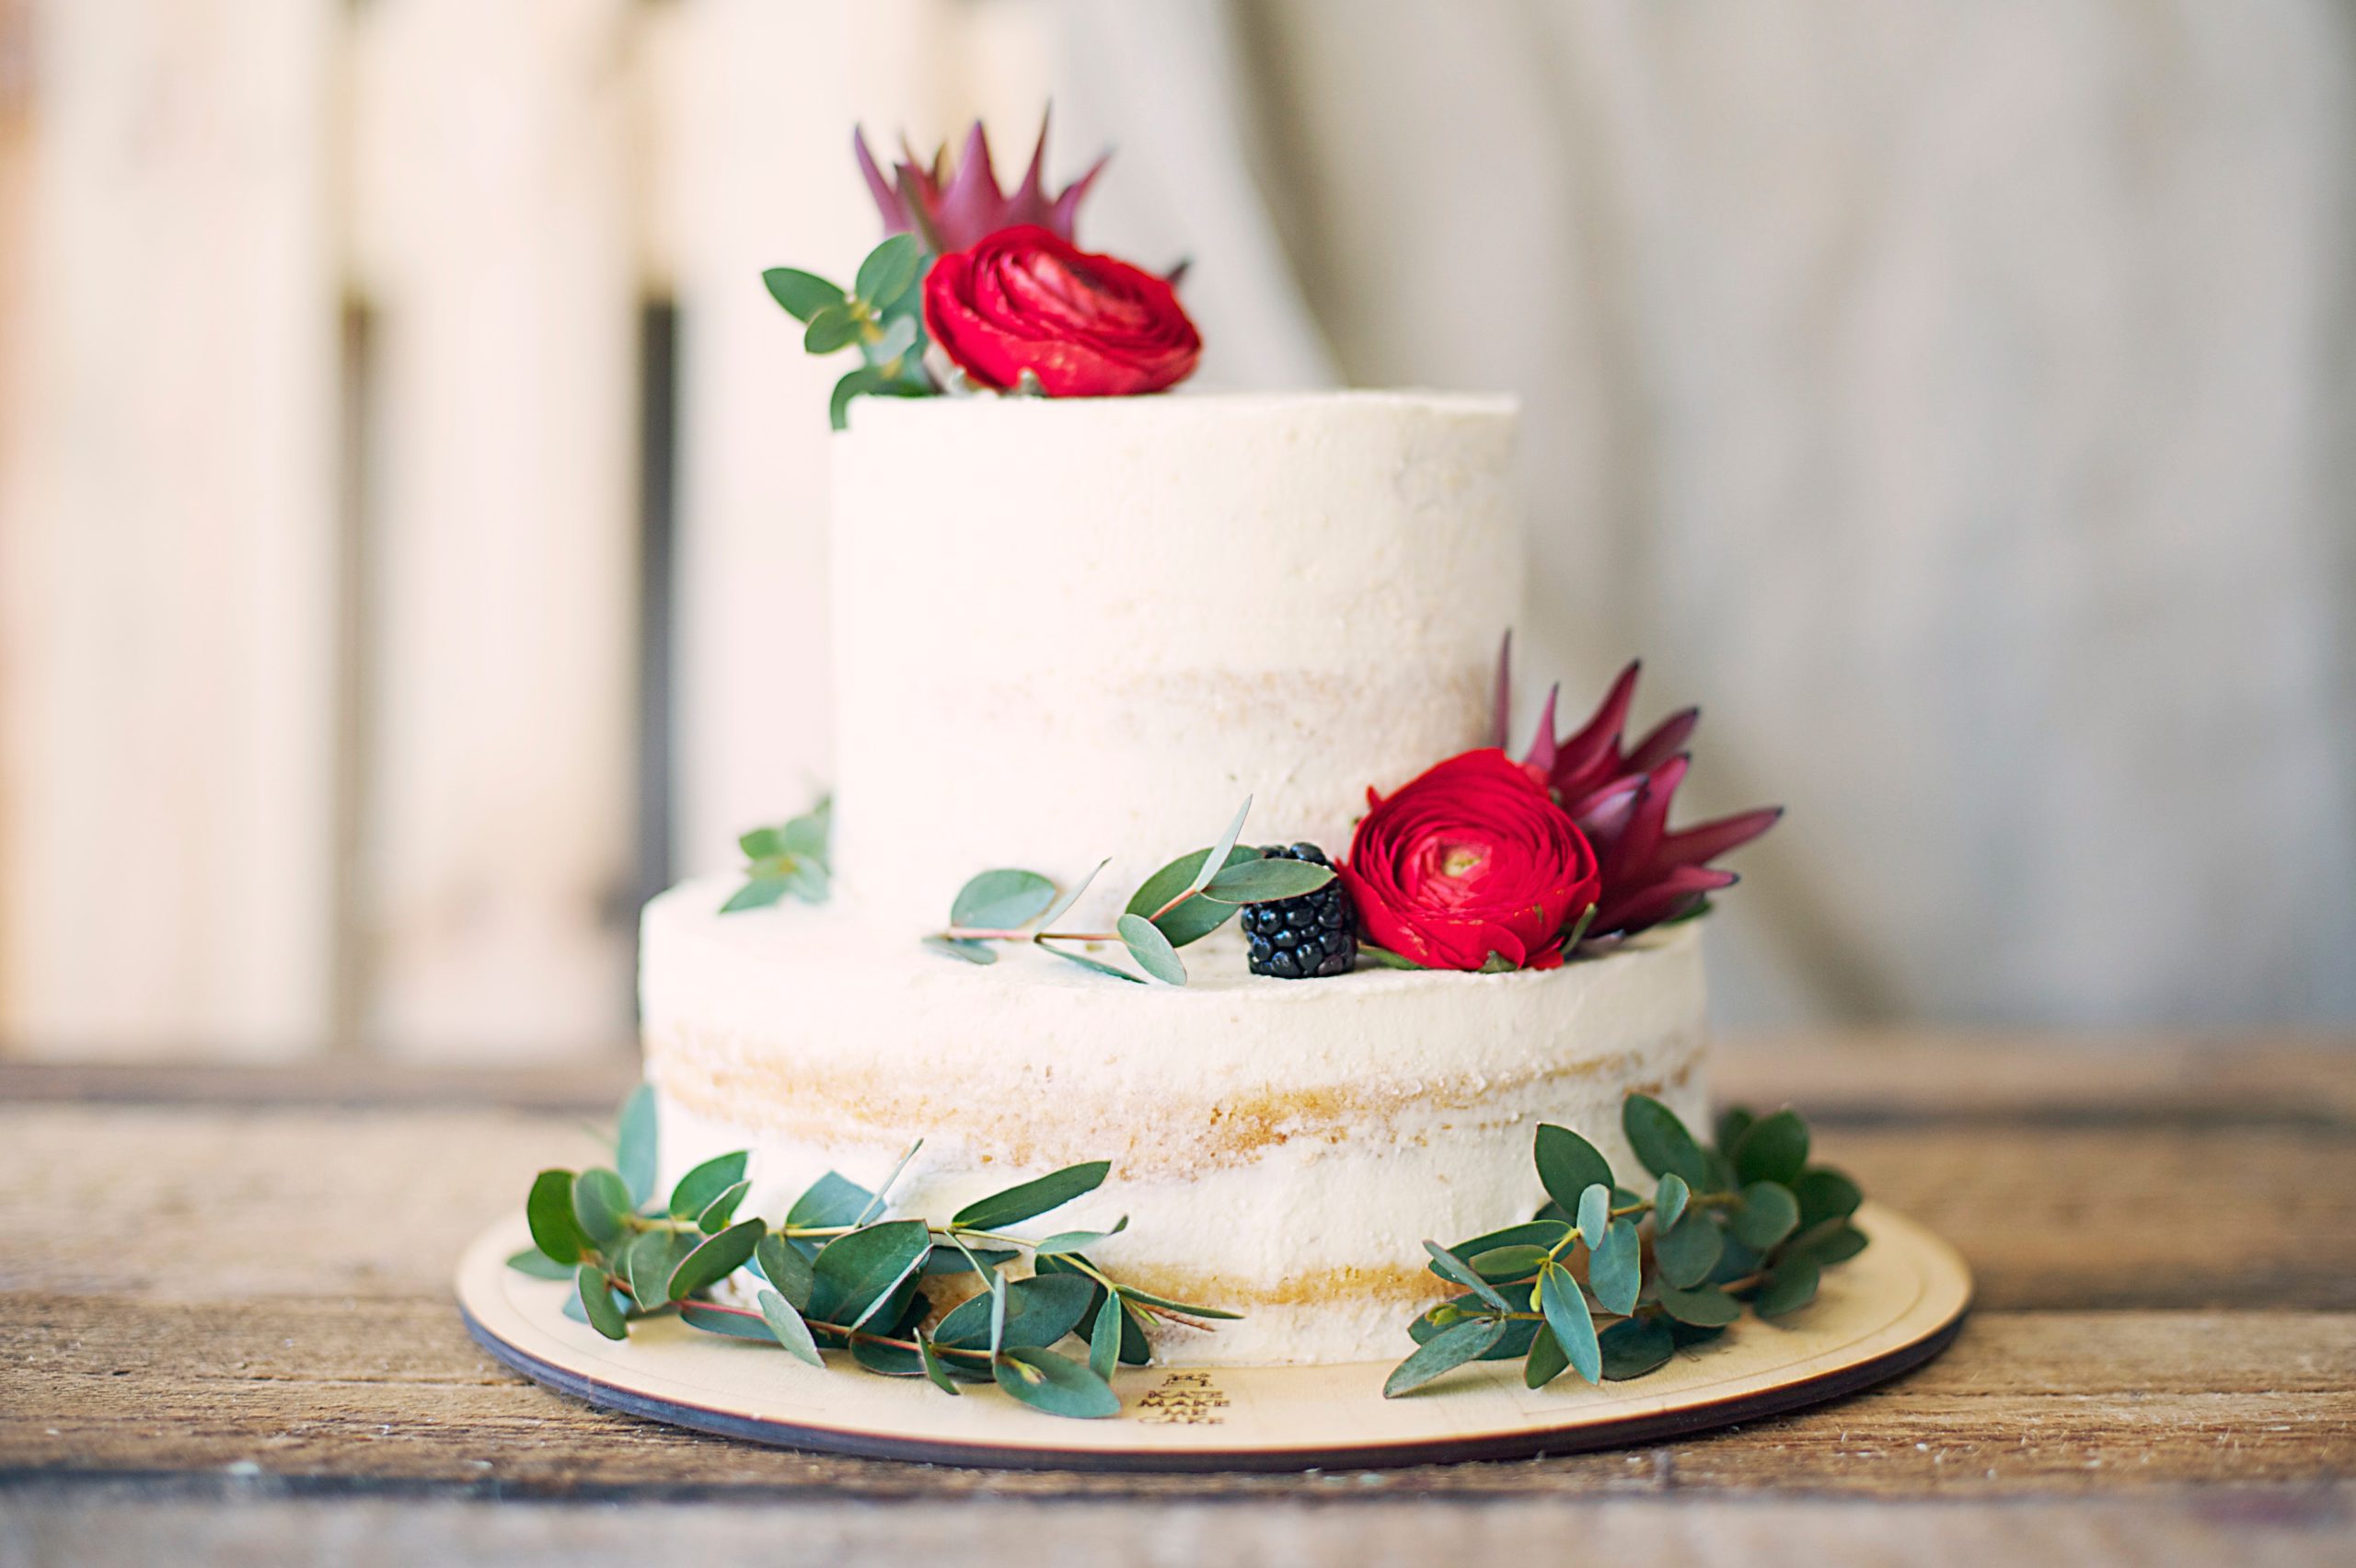 Decorated white cake with two tiers with roses, berries, and greenery along the outside